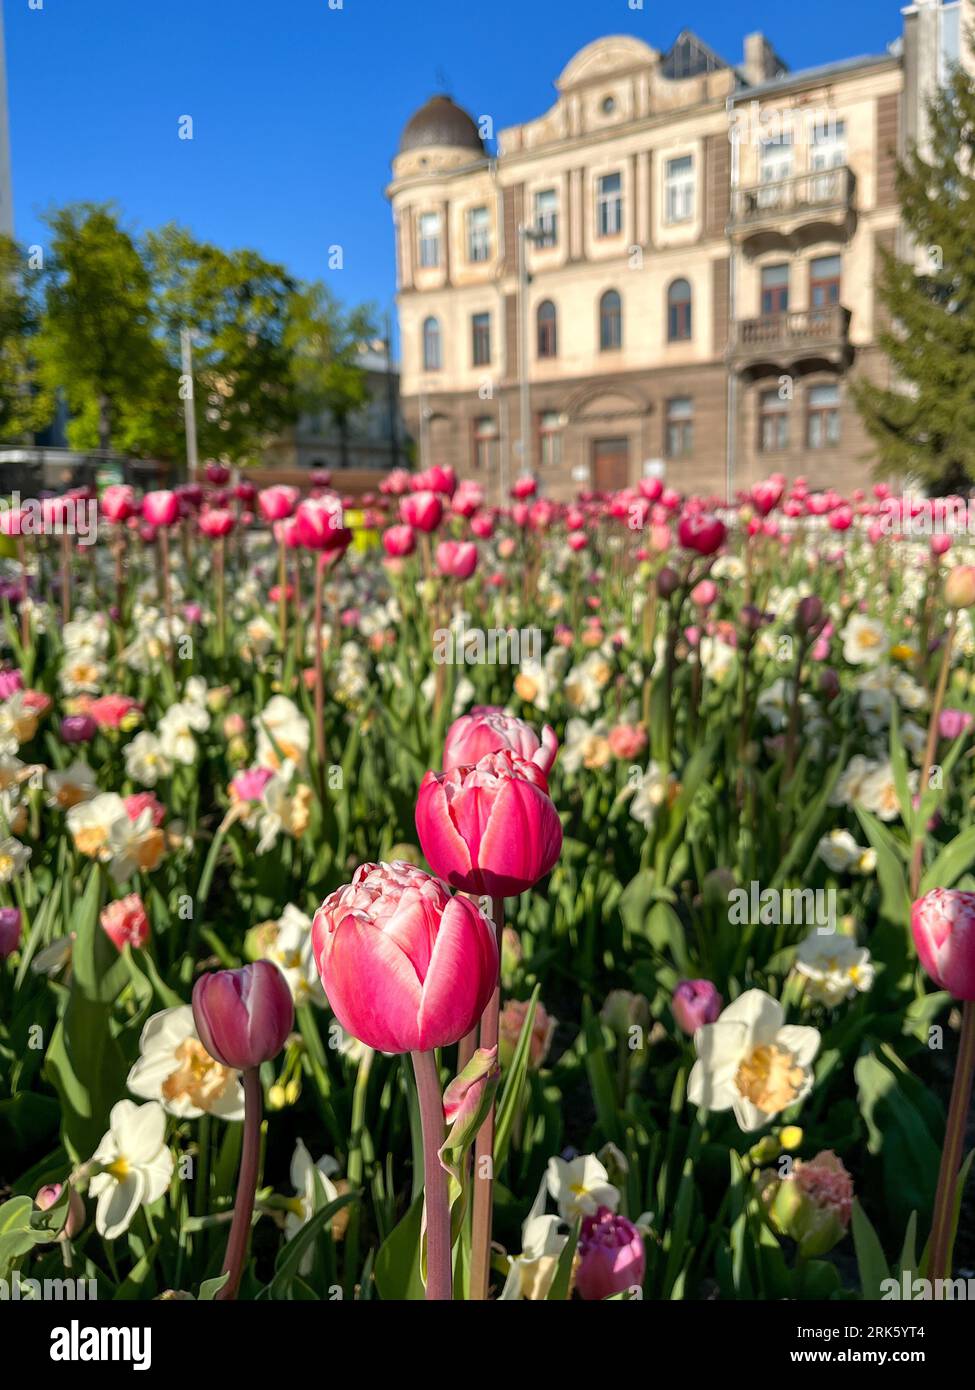 A shot of the city center of Kaunas, Lithuania, featuring a vibrant display of colorful tulips Stock Photo